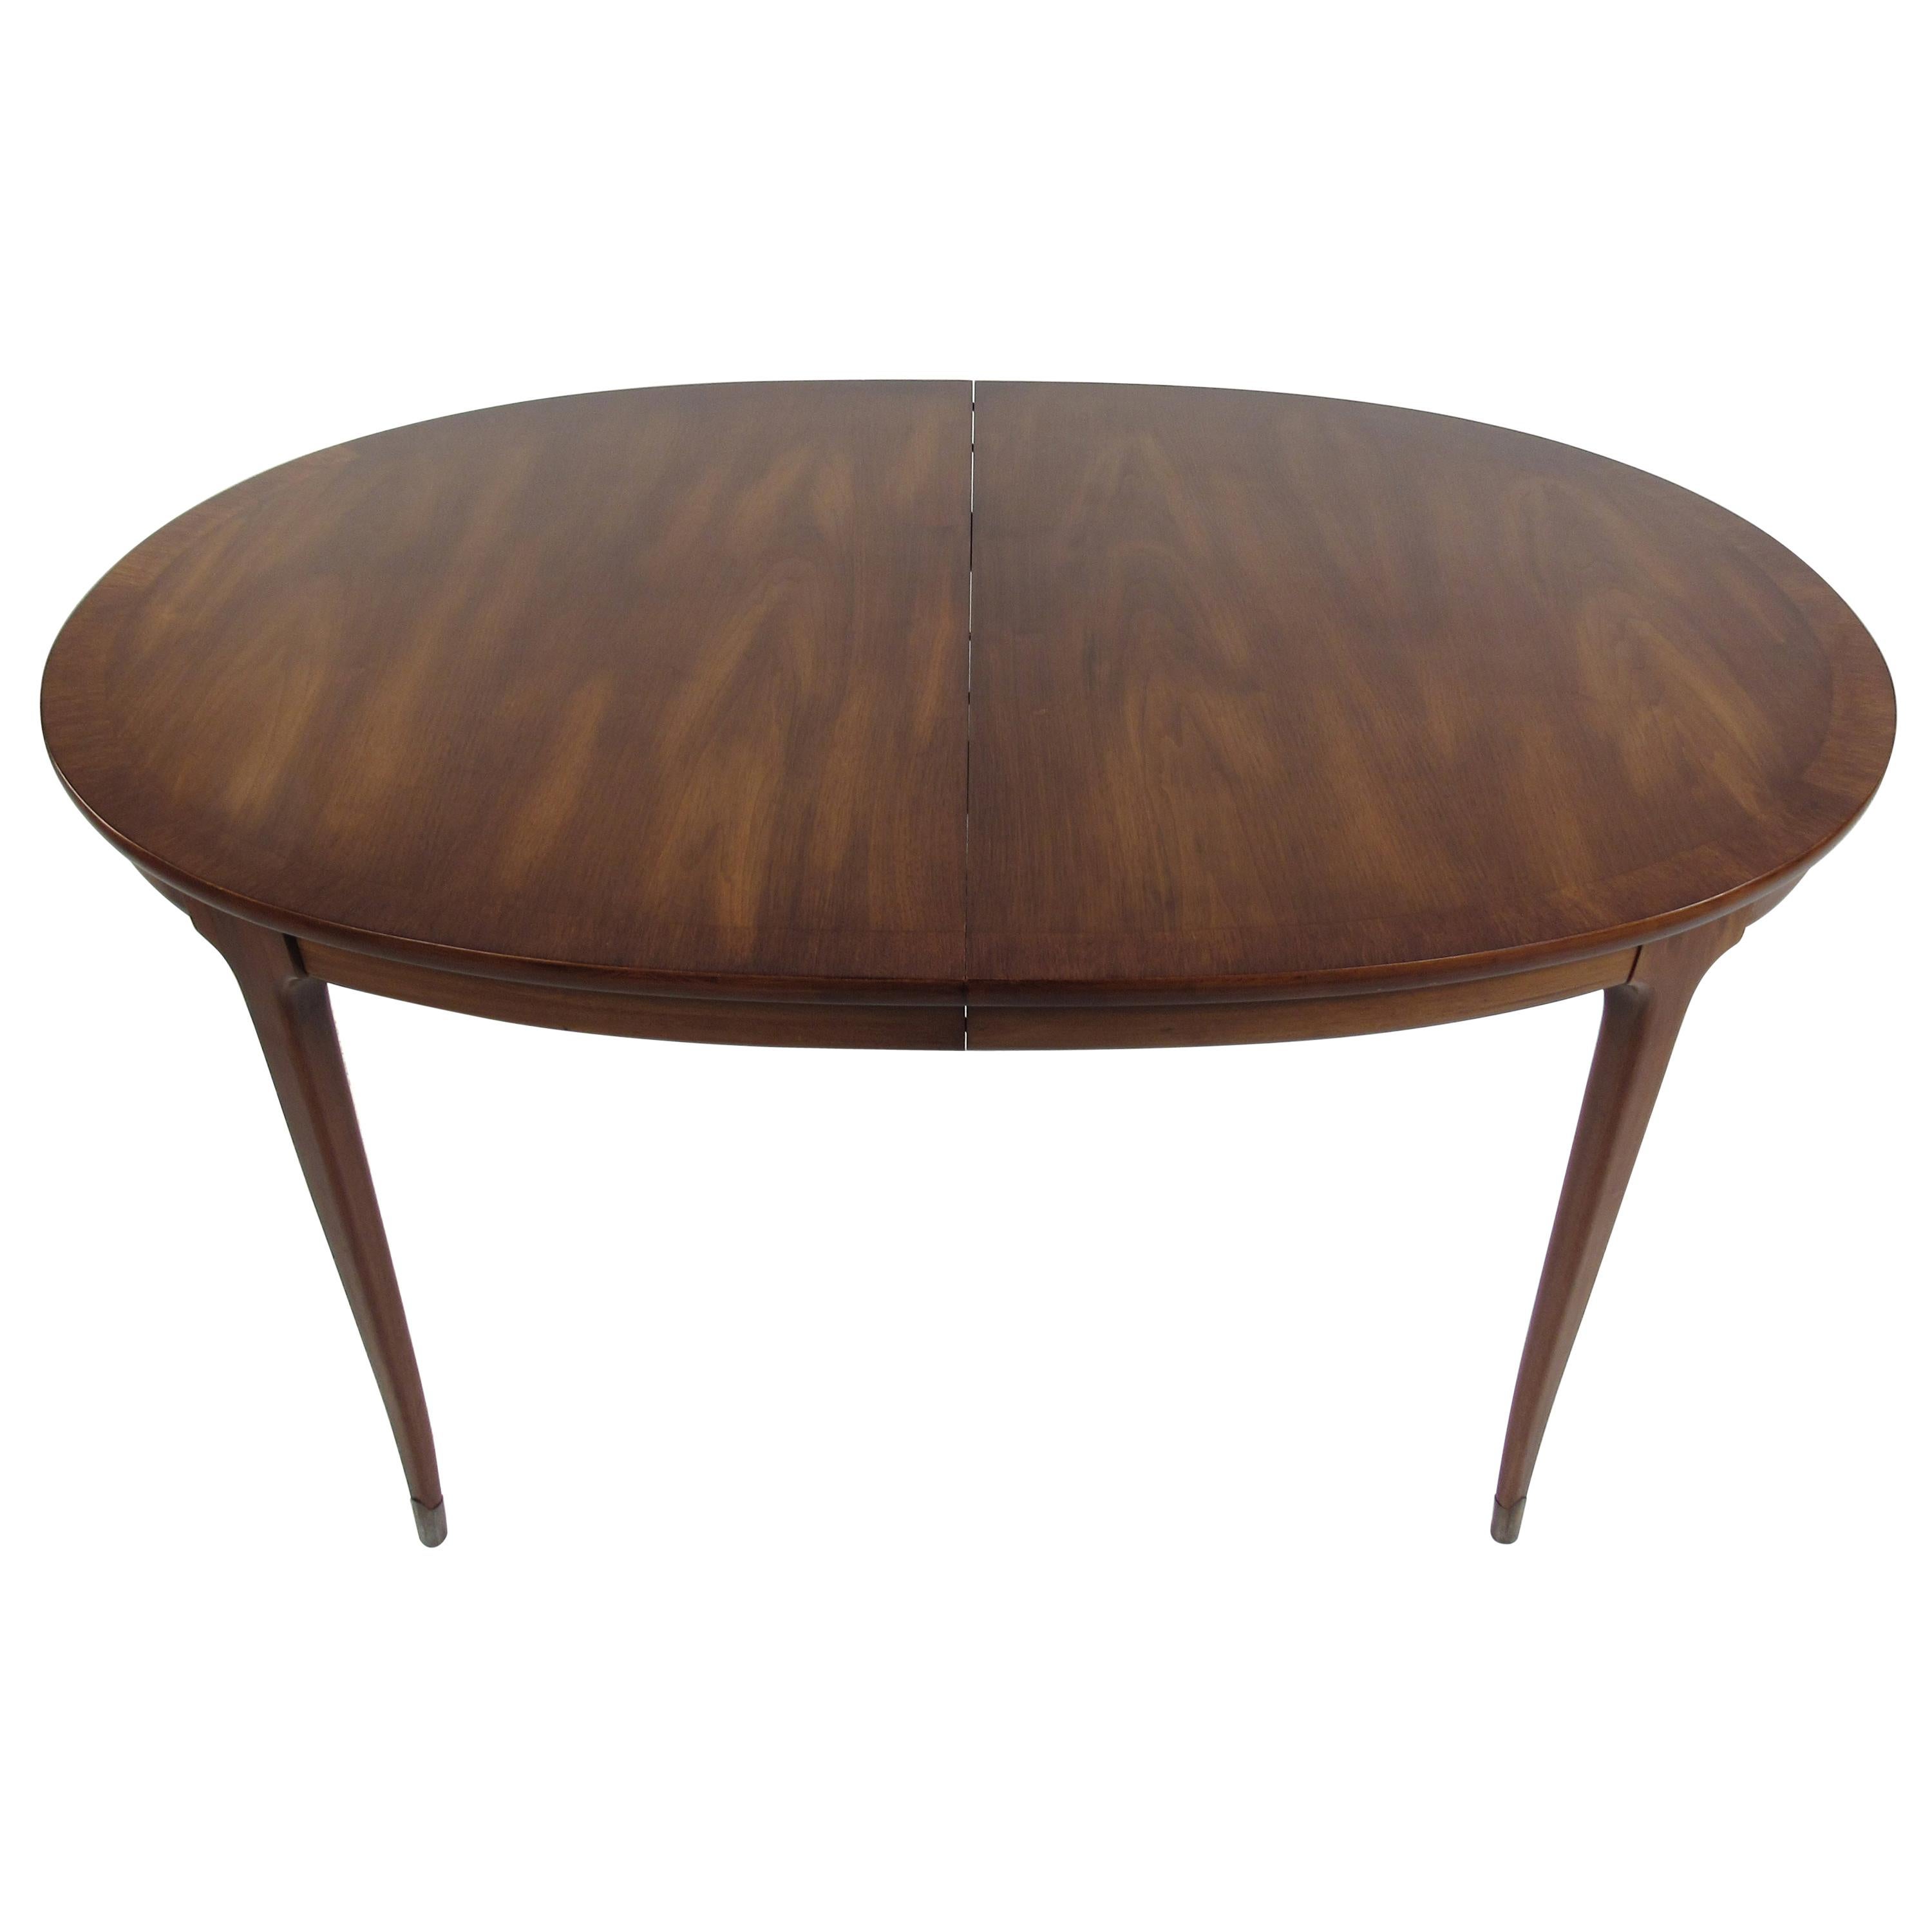 Oval Midcentury Walnut Dining Table by White Furniture Company